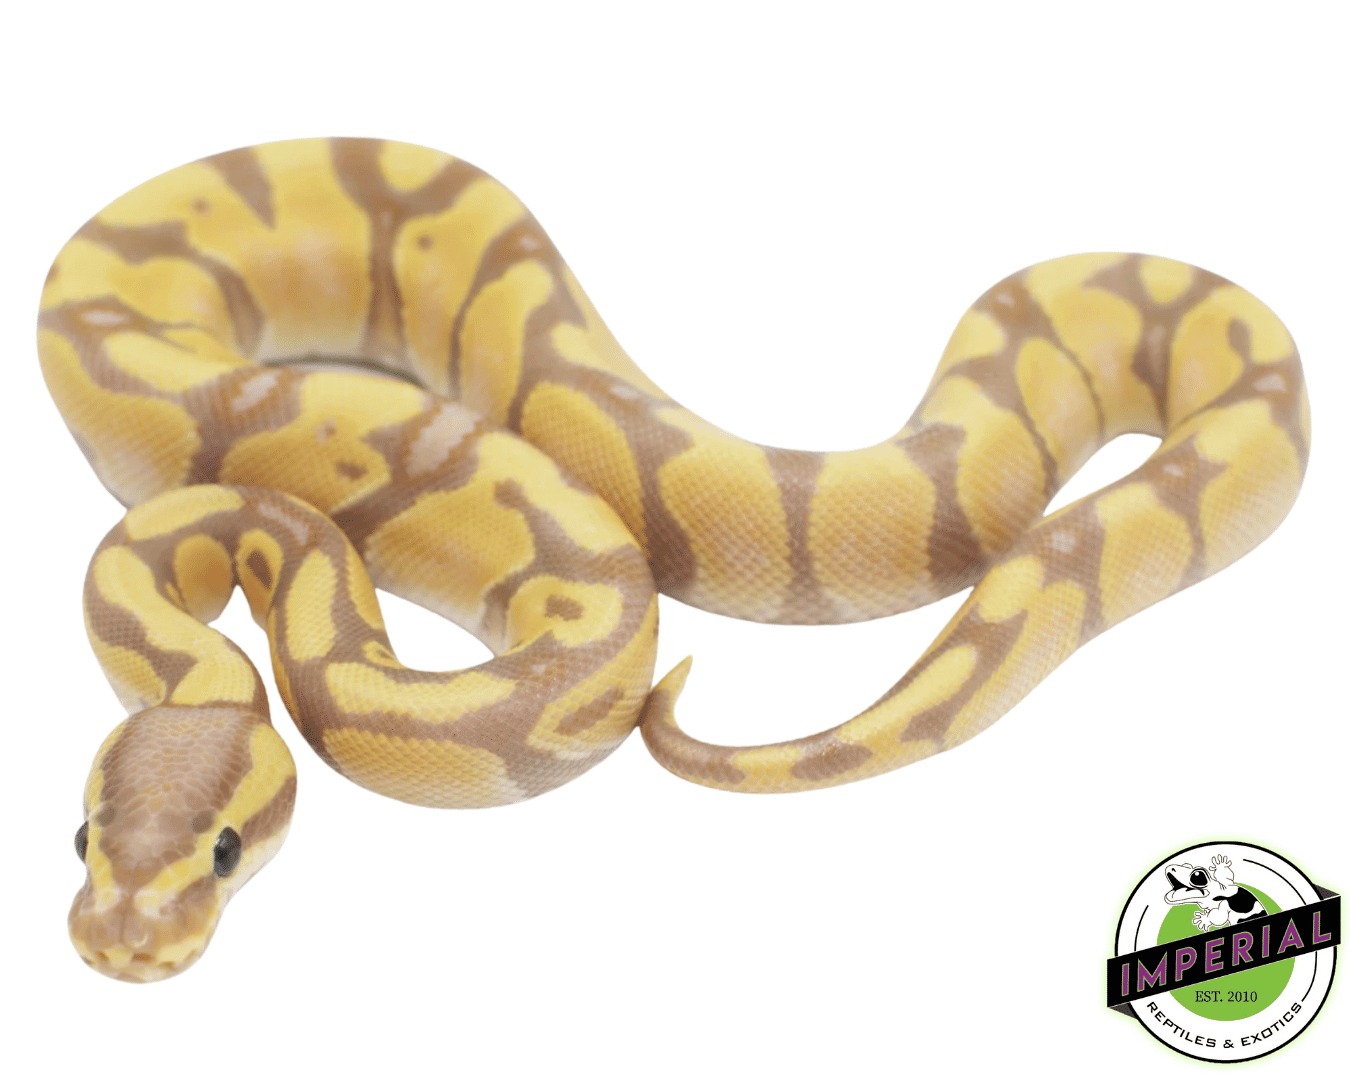 banana enchi ball python for sale, buy reptiles online at cheap prices